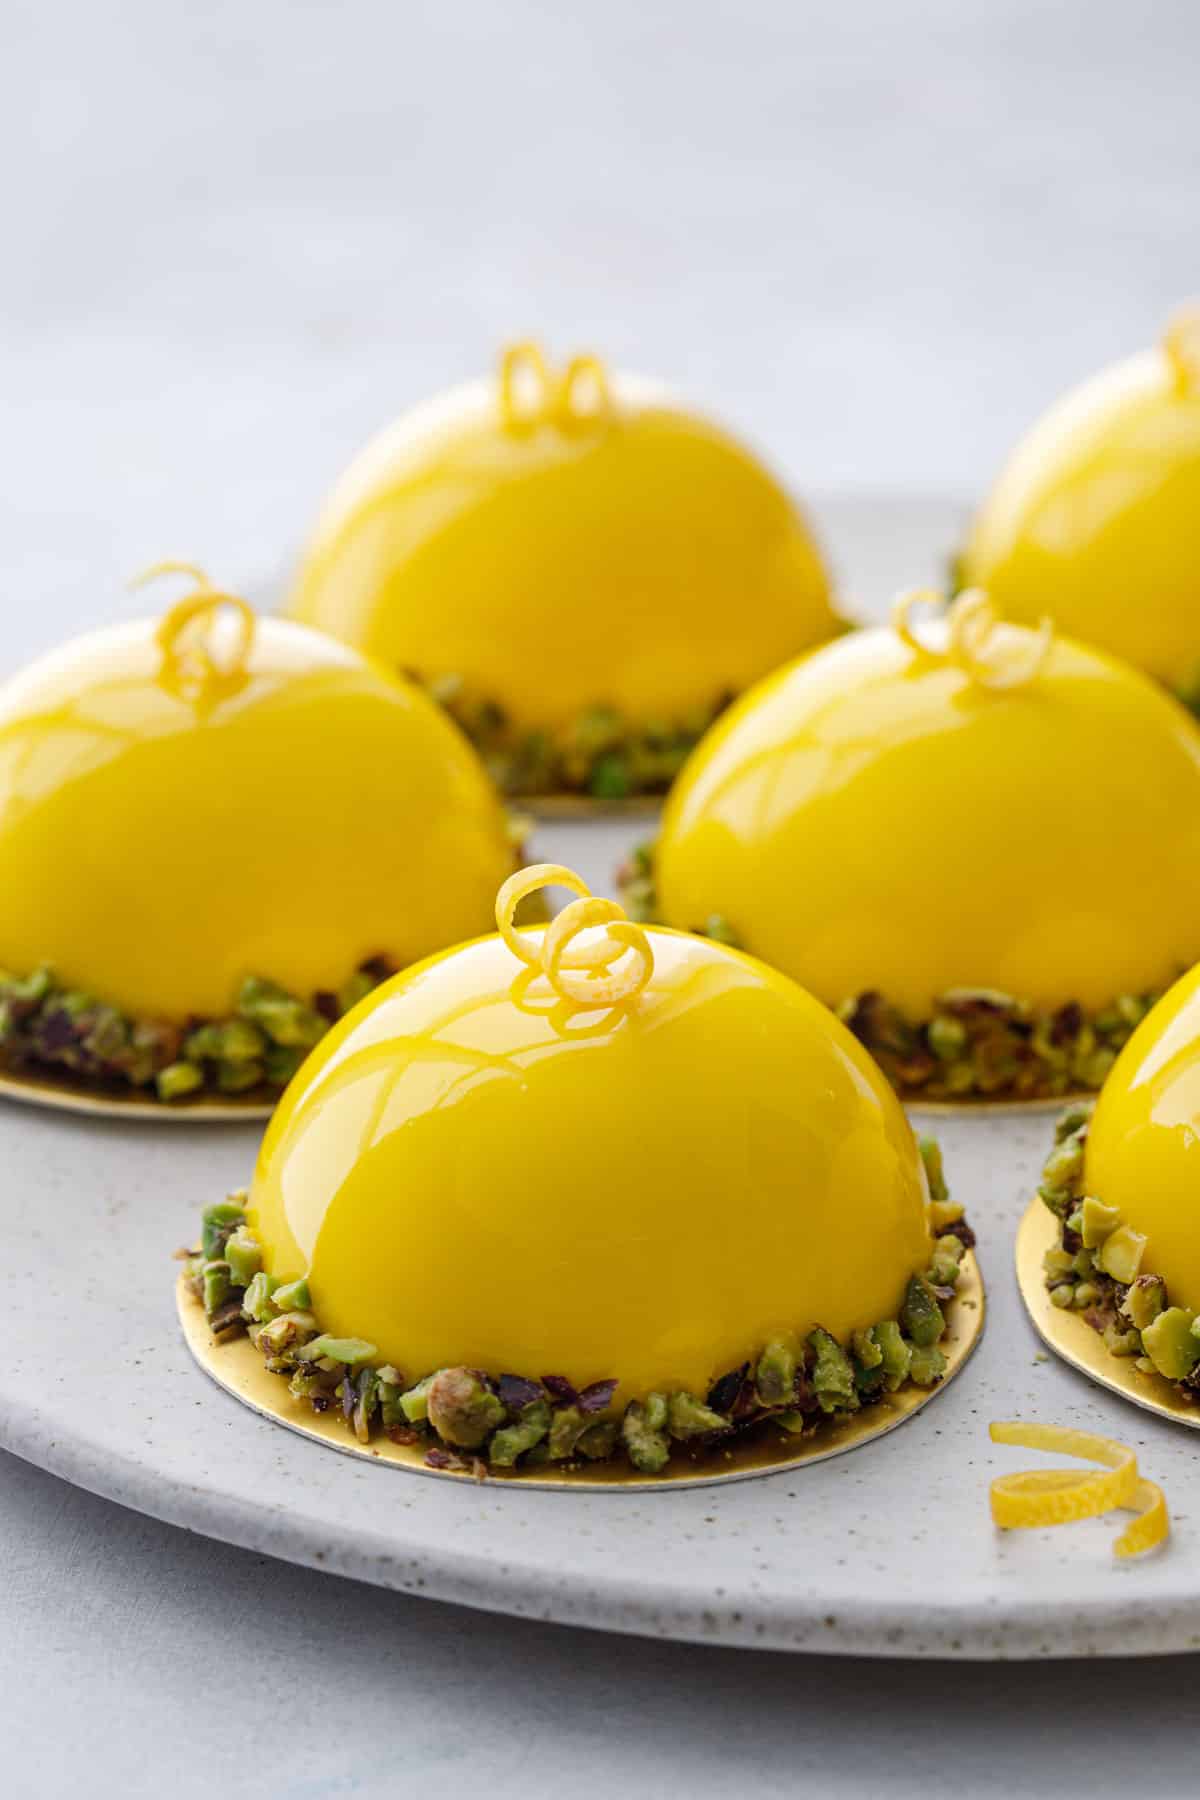 Plate of bright yellow mirror glazed mousse cakes with pistachio edges and a curl of lemon peel on top.